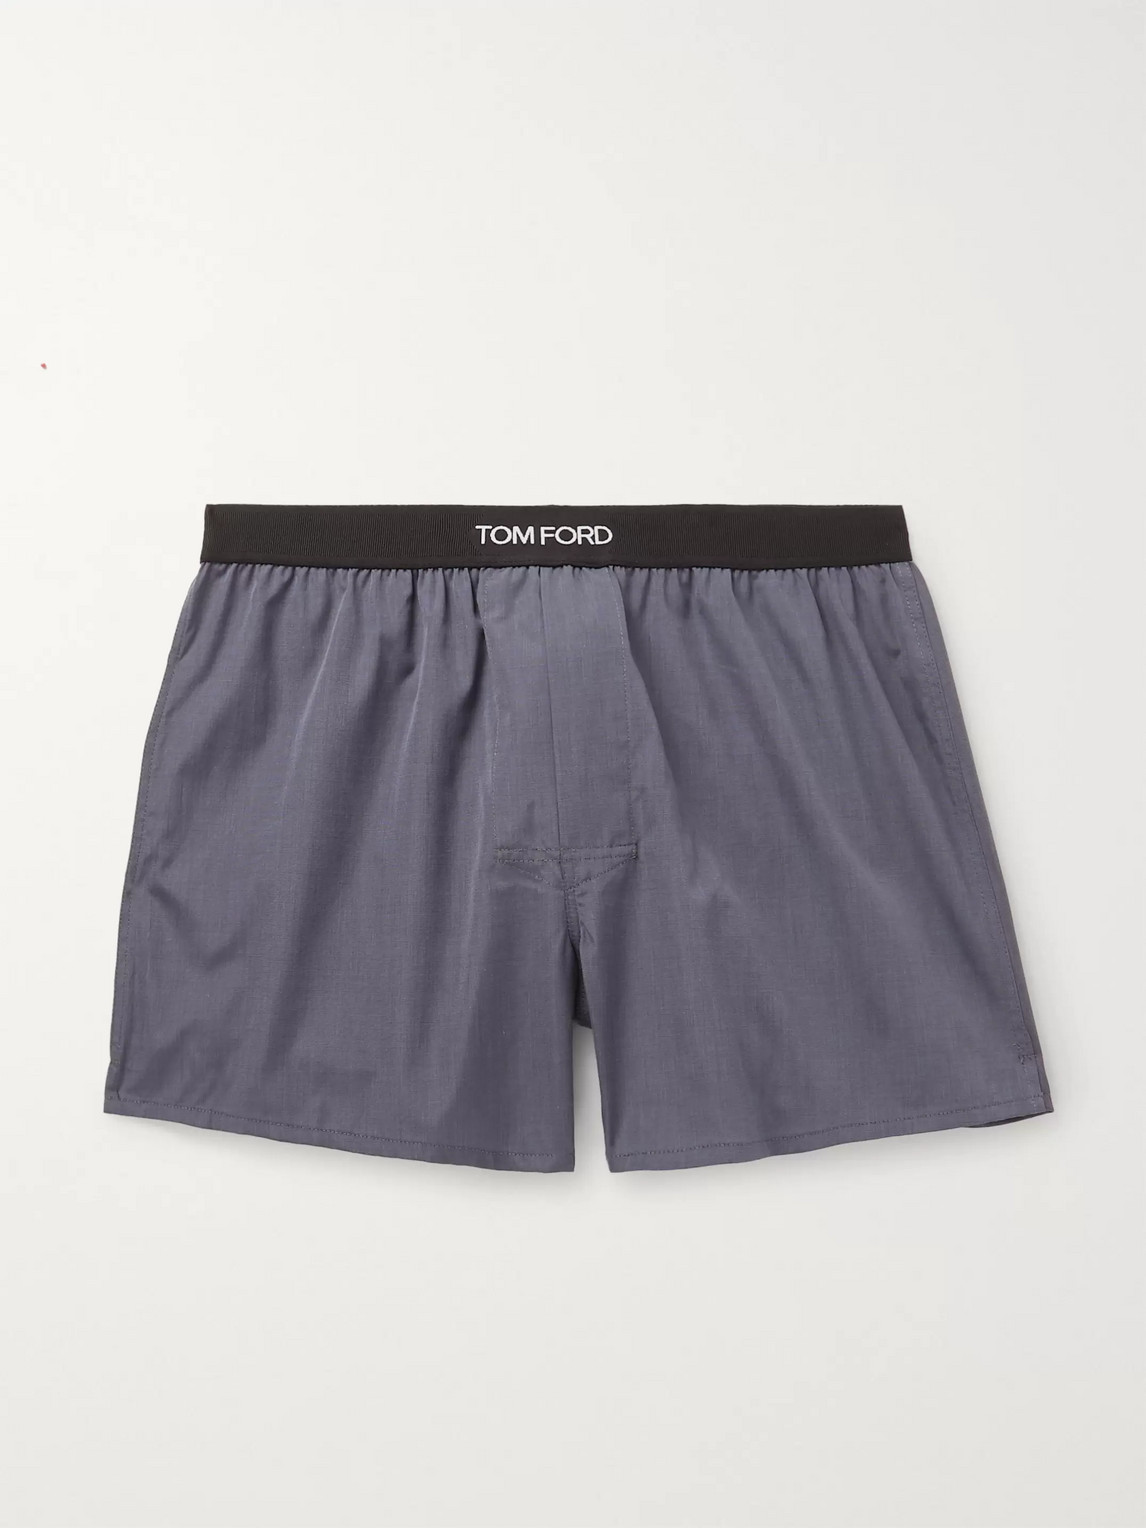 TOM FORD COTTON BOXER SHORTS